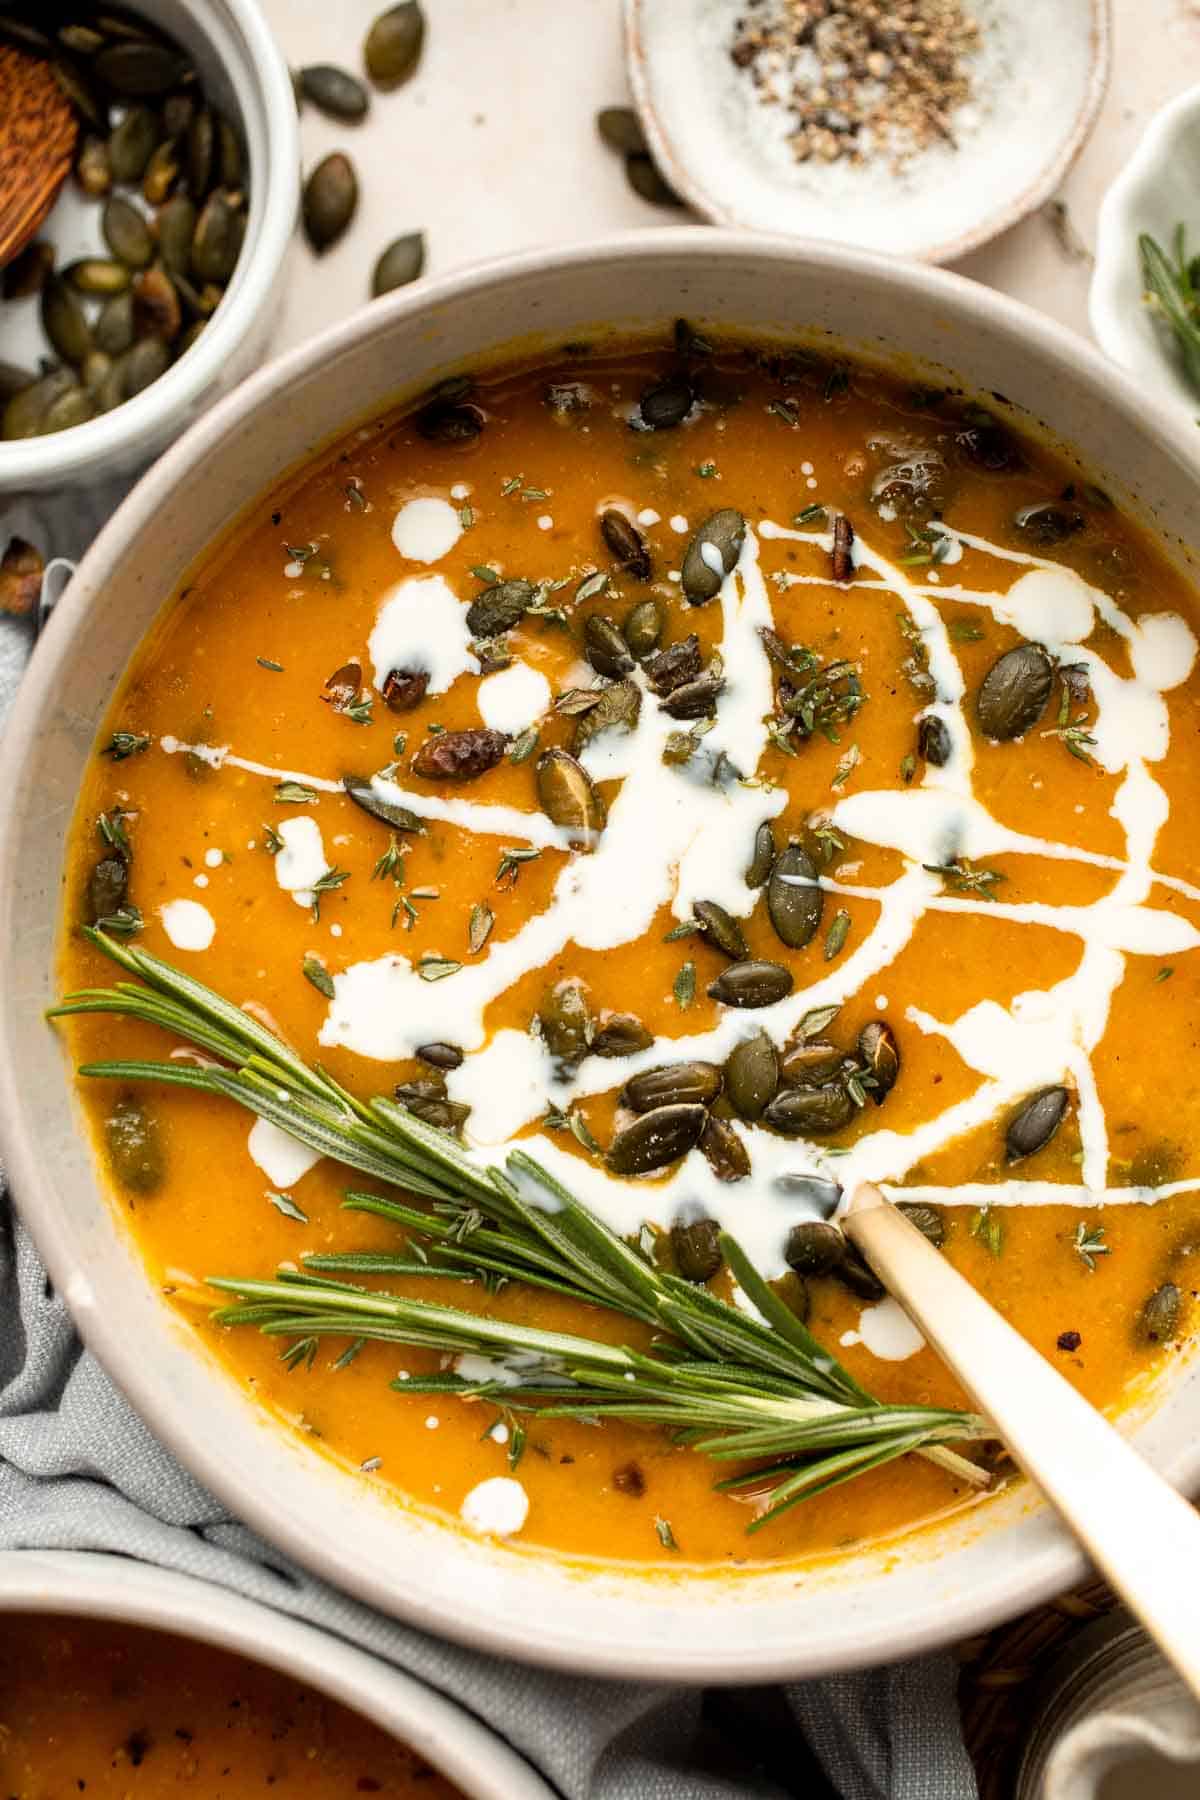 Savor the taste of fall with Roasted Butternut Squash Soup. This vegan soup is healthy, nourishing, and delicious comfort food in a bowl. | aheadofthyme.com